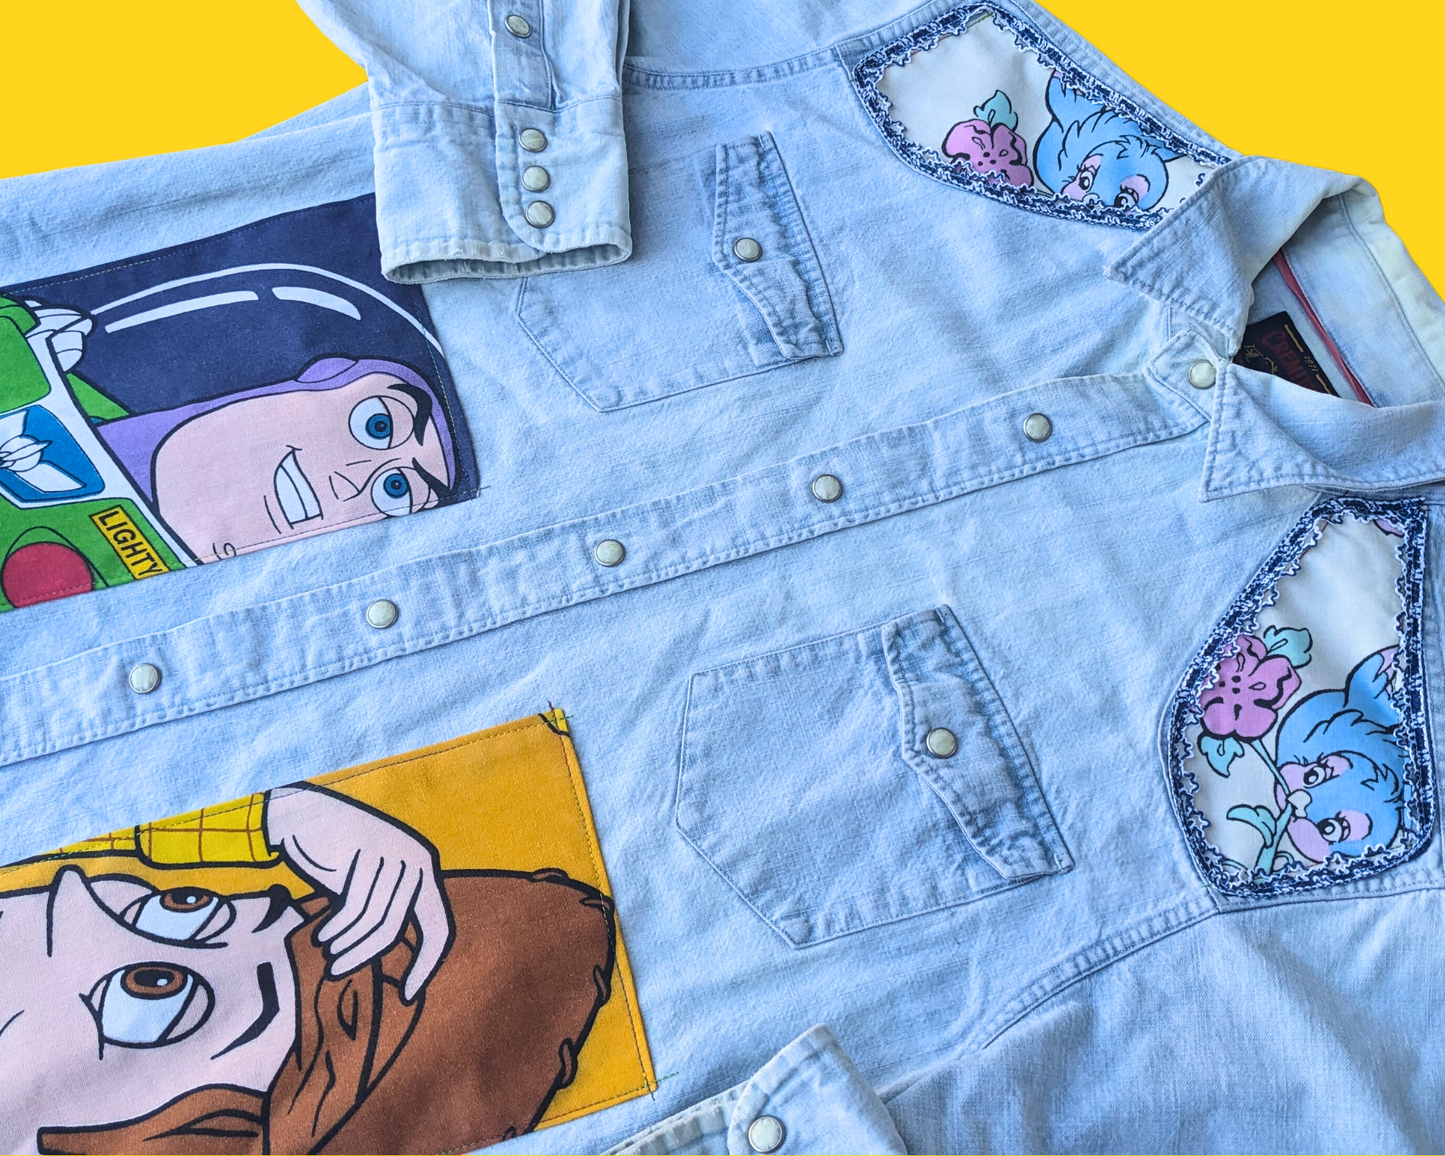 Handmade, Upcycled Denim Snap Buttons Shirt Patched Up with Nostalgic Bedsheets (Toy Story, E.T, The Simpsons and Others) Size L